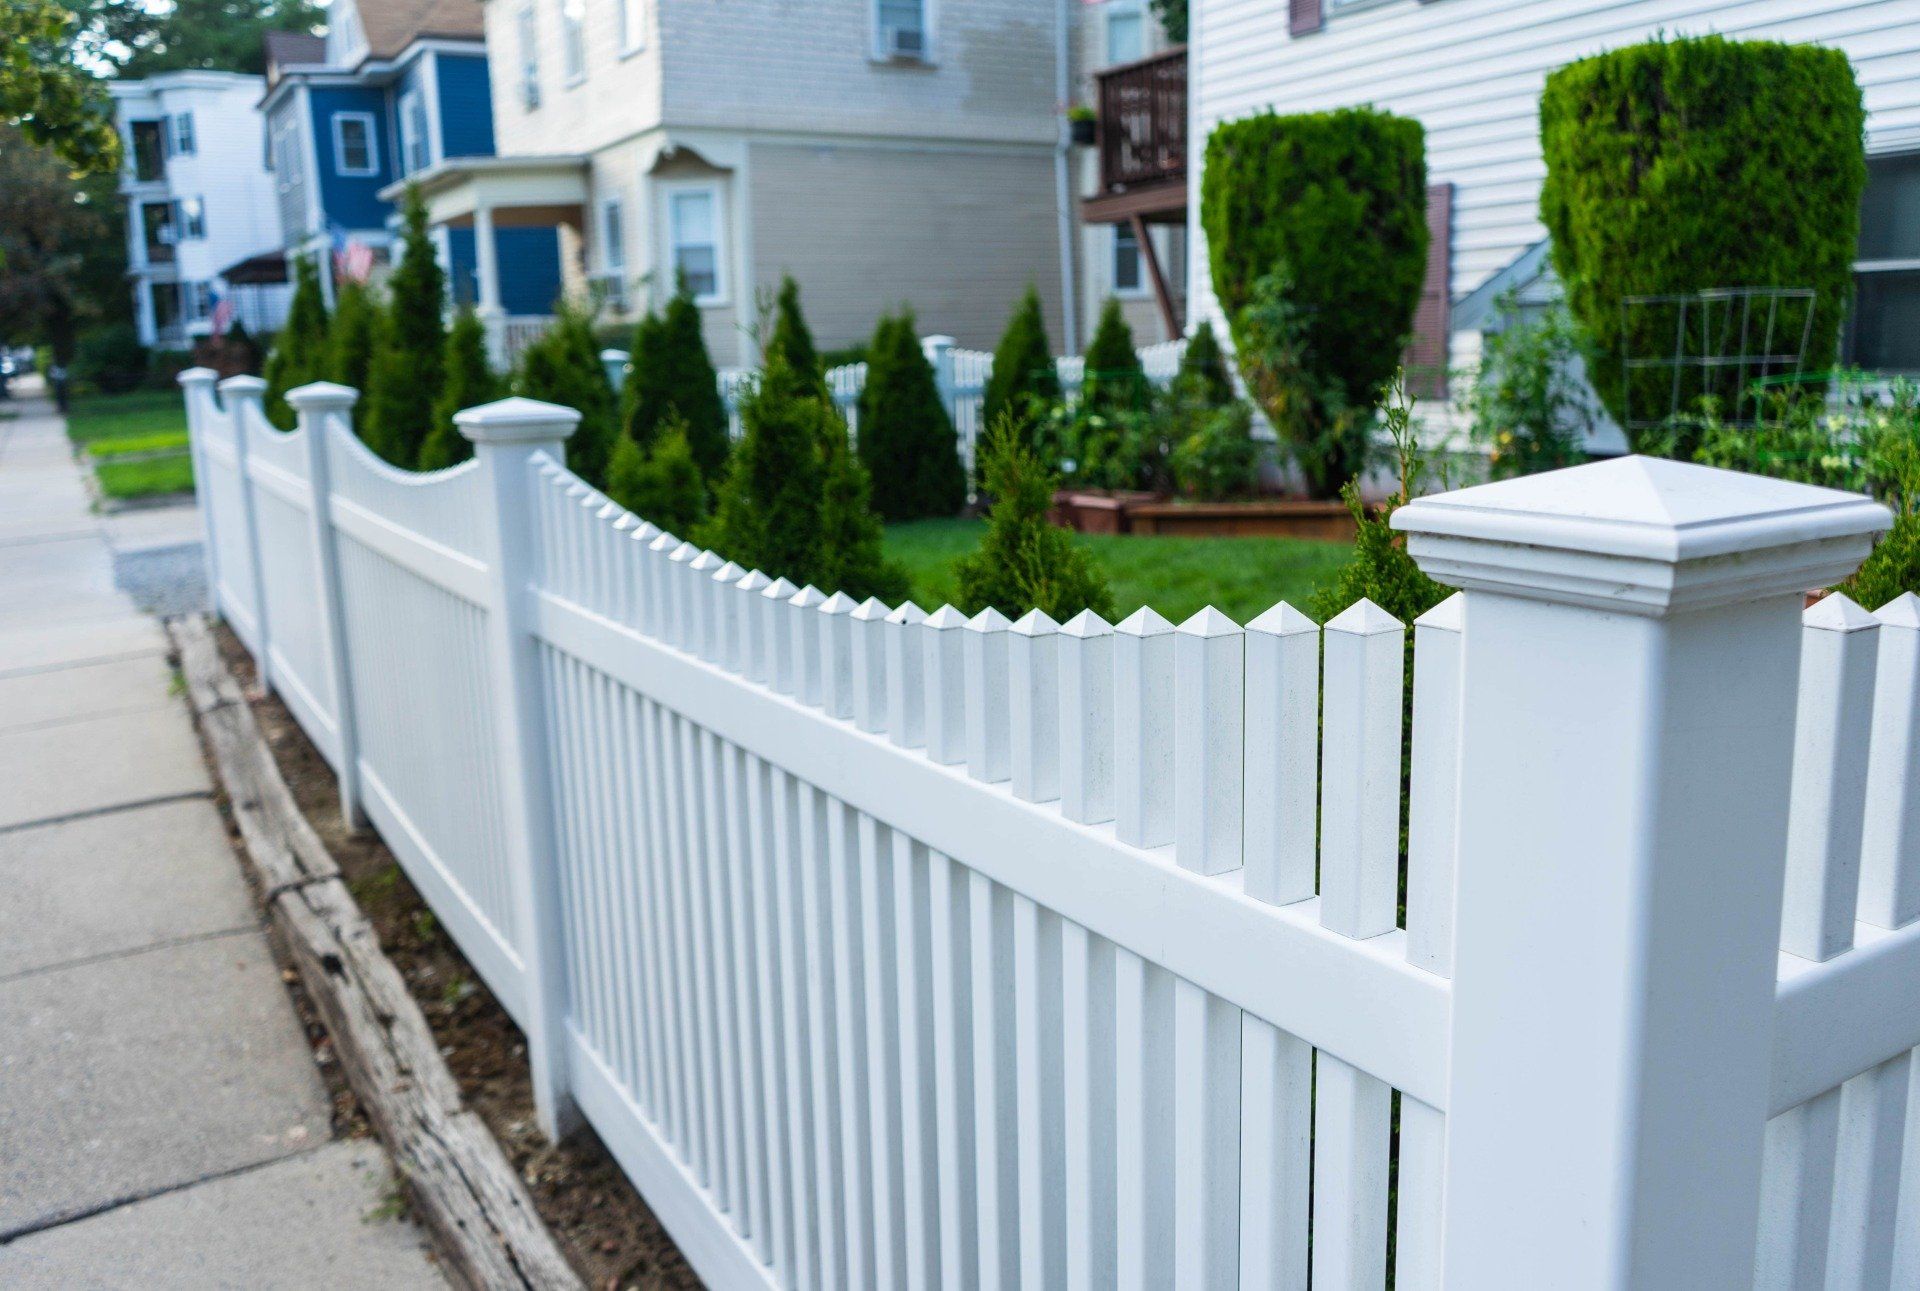 white picket fence surrounding the home